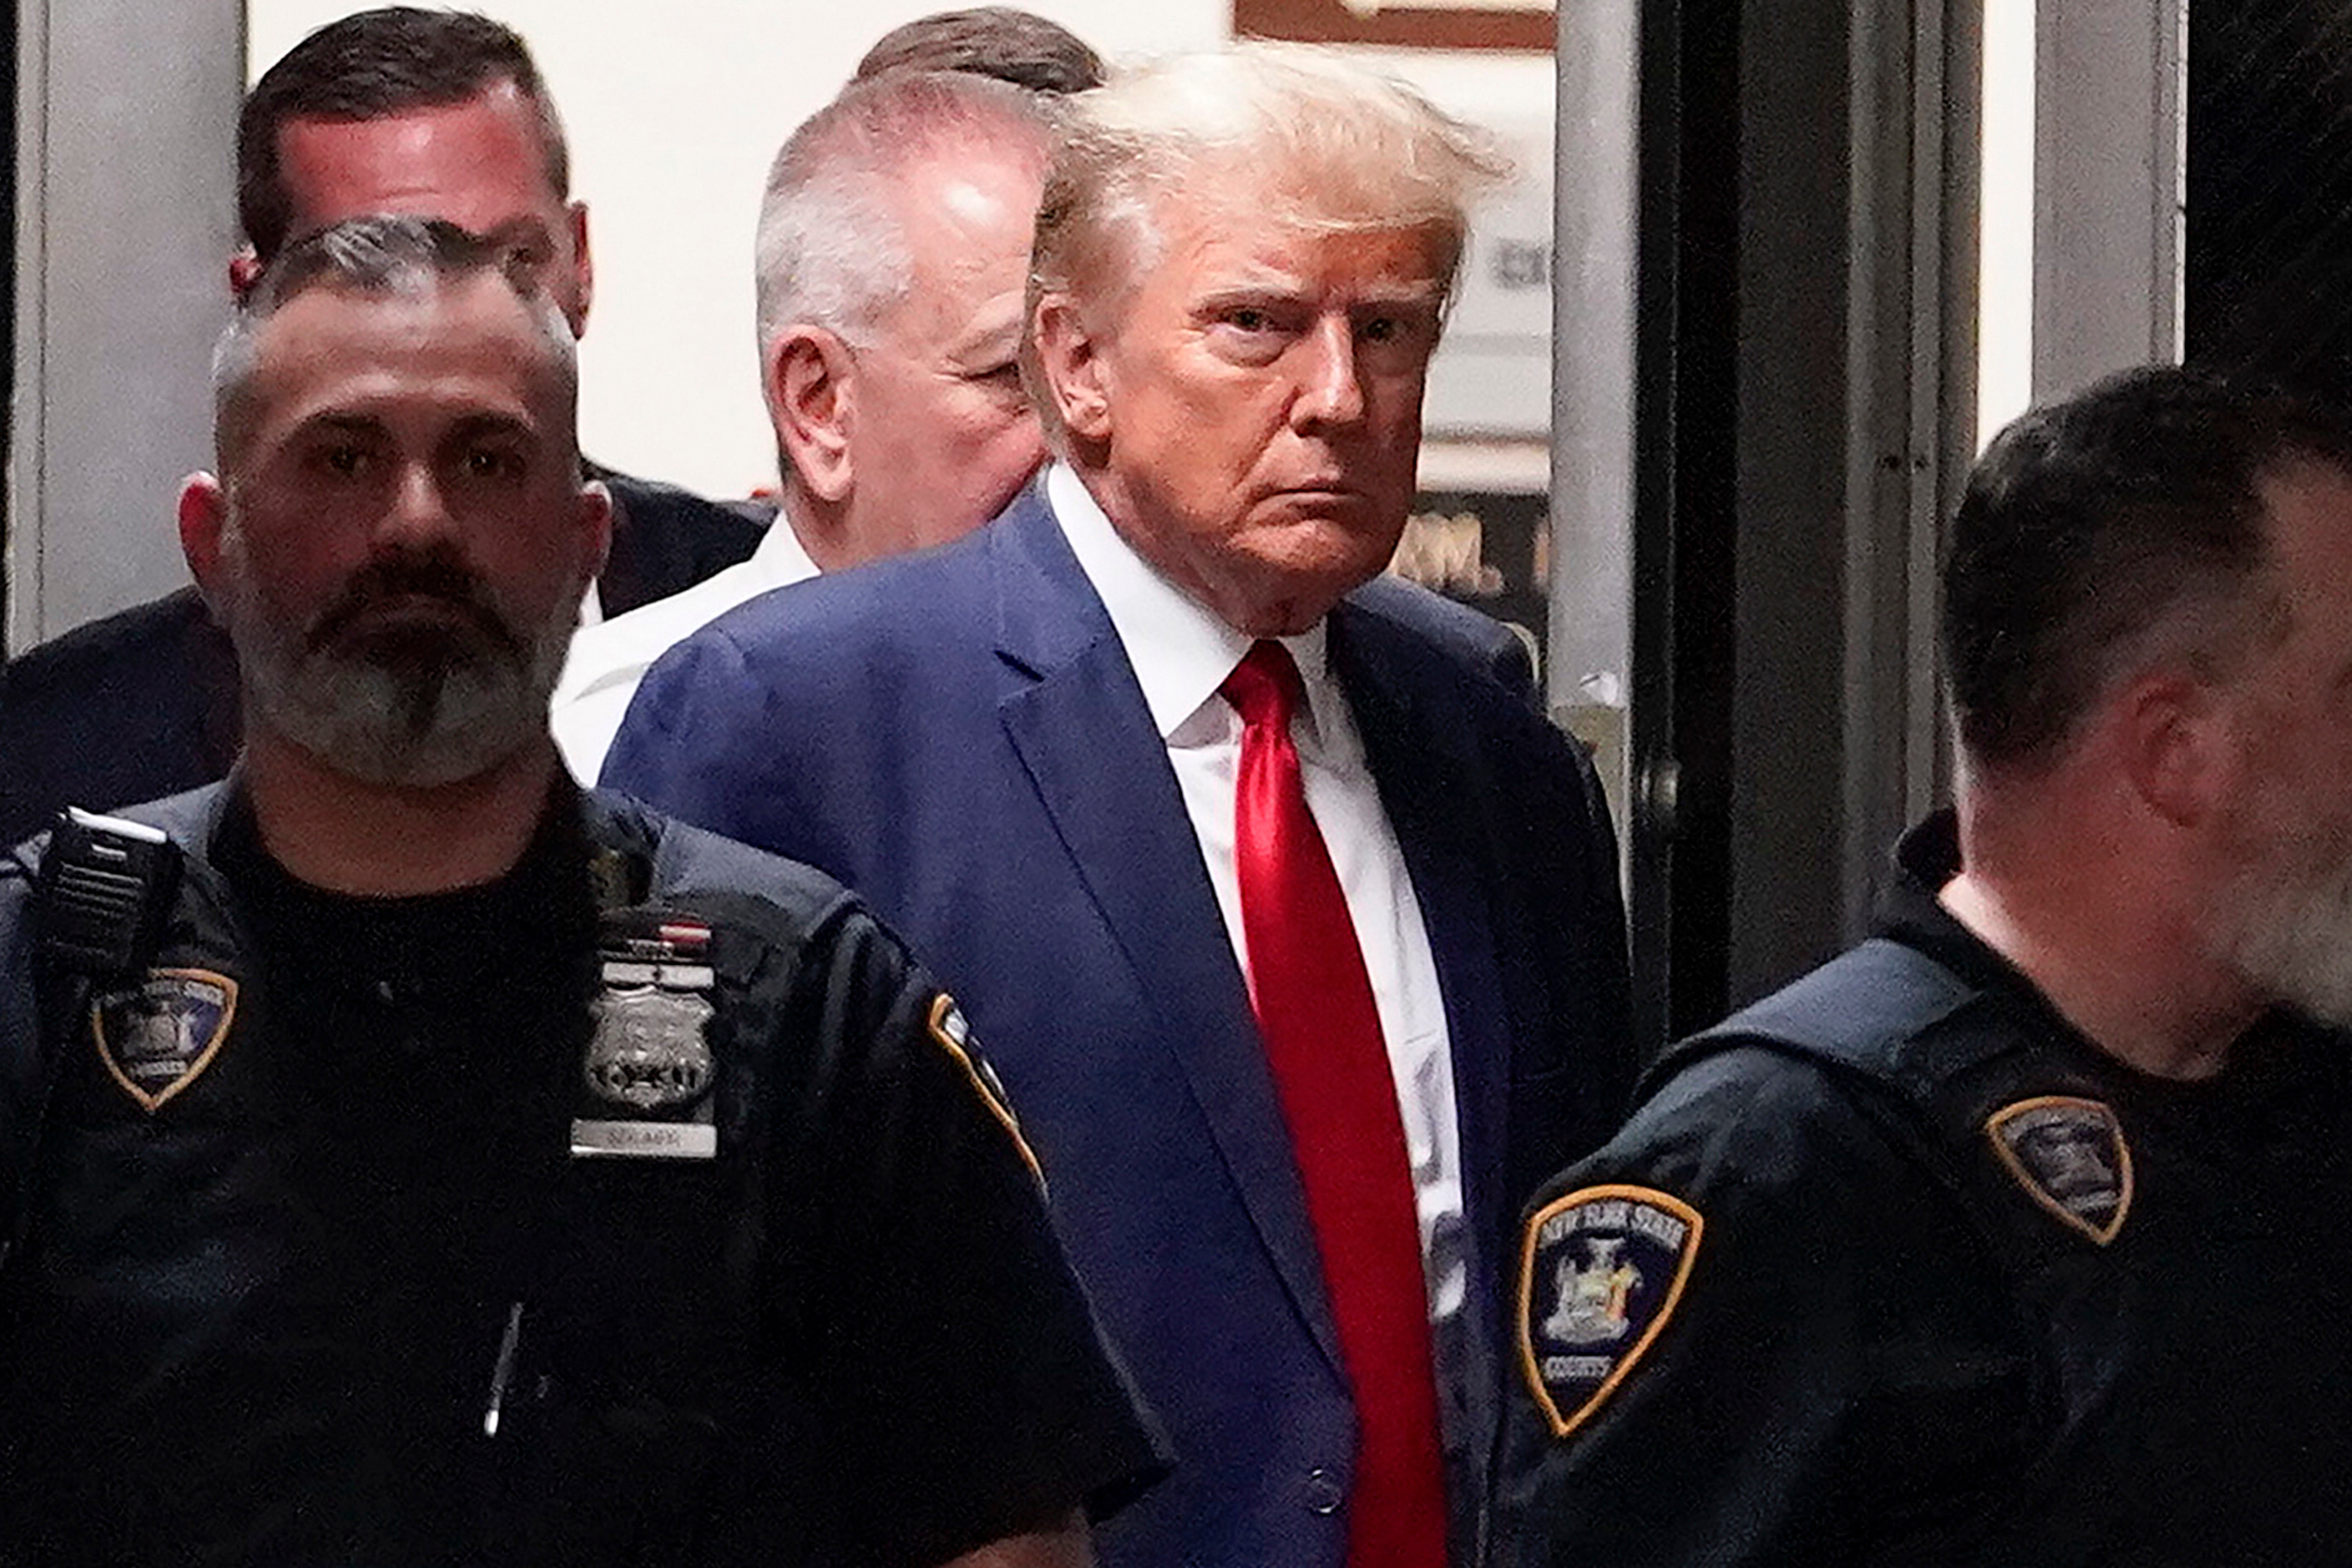 Former president Donald Trump is escorted into a New York courtroom on 4 April 2023 to answer to the state indictment accusing him of falsifying business records to conceal a hush money payment made to porn star Stormy Daniels